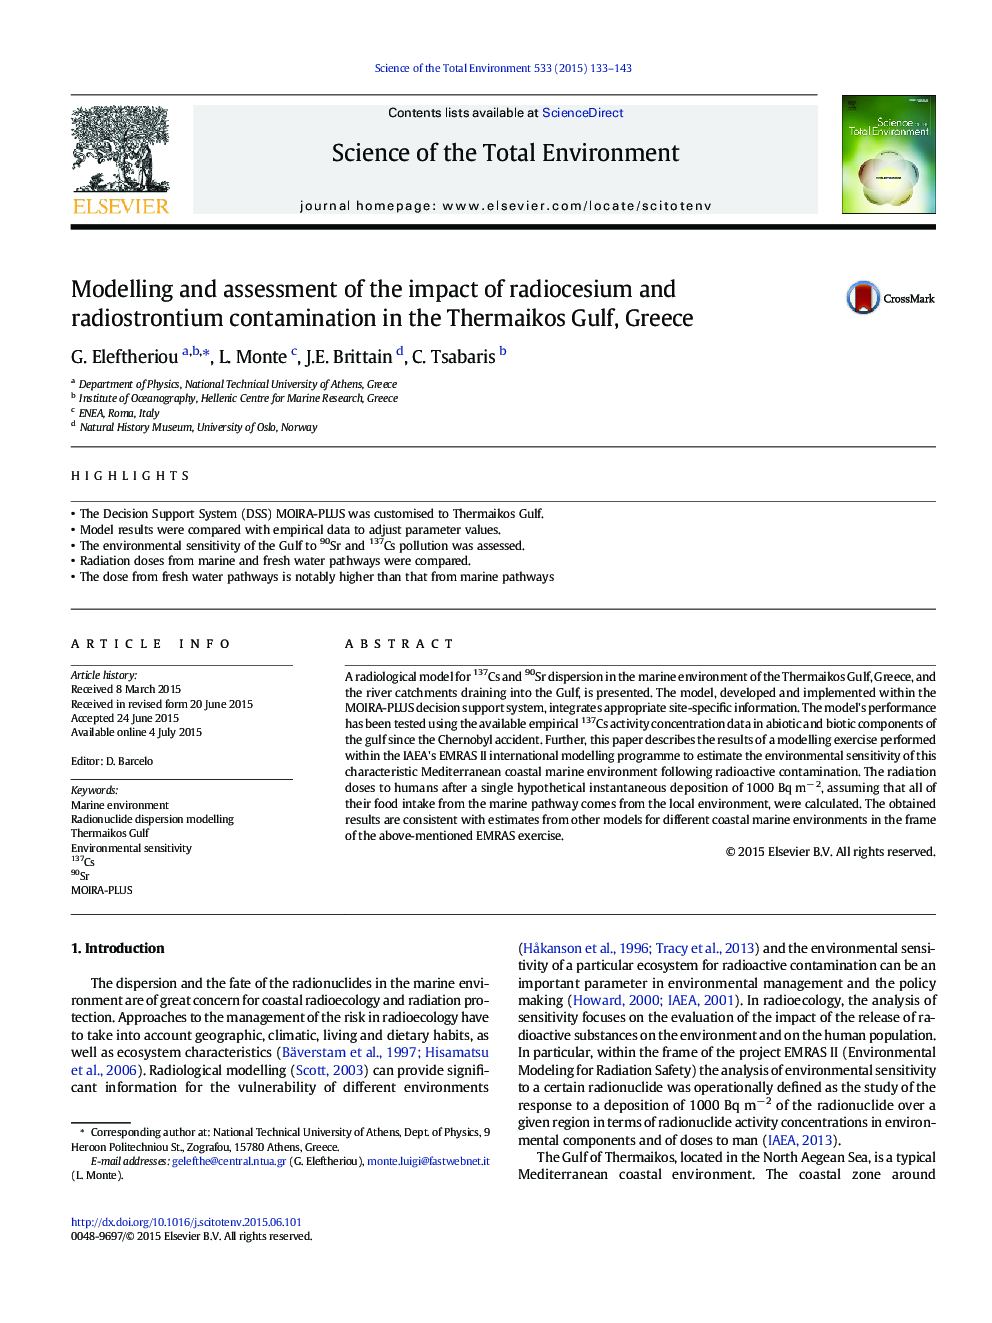 Modelling and assessment of the impact of radiocesium and radiostrontium contamination in the Thermaikos Gulf, Greece